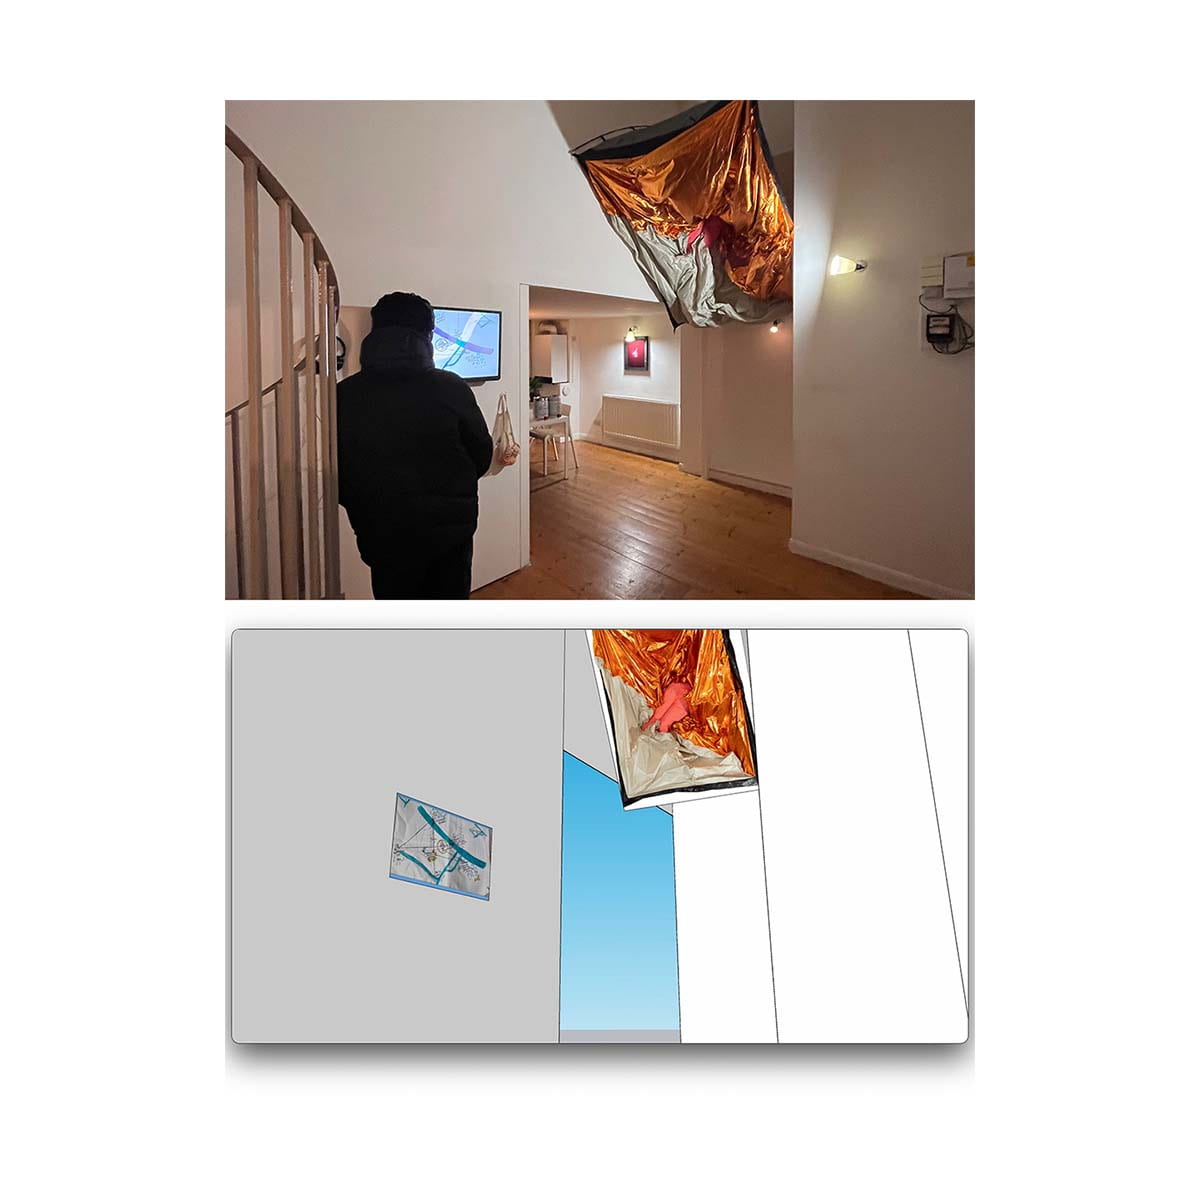 An image of a mock-up of the exhibition space, and an image of the actual space.